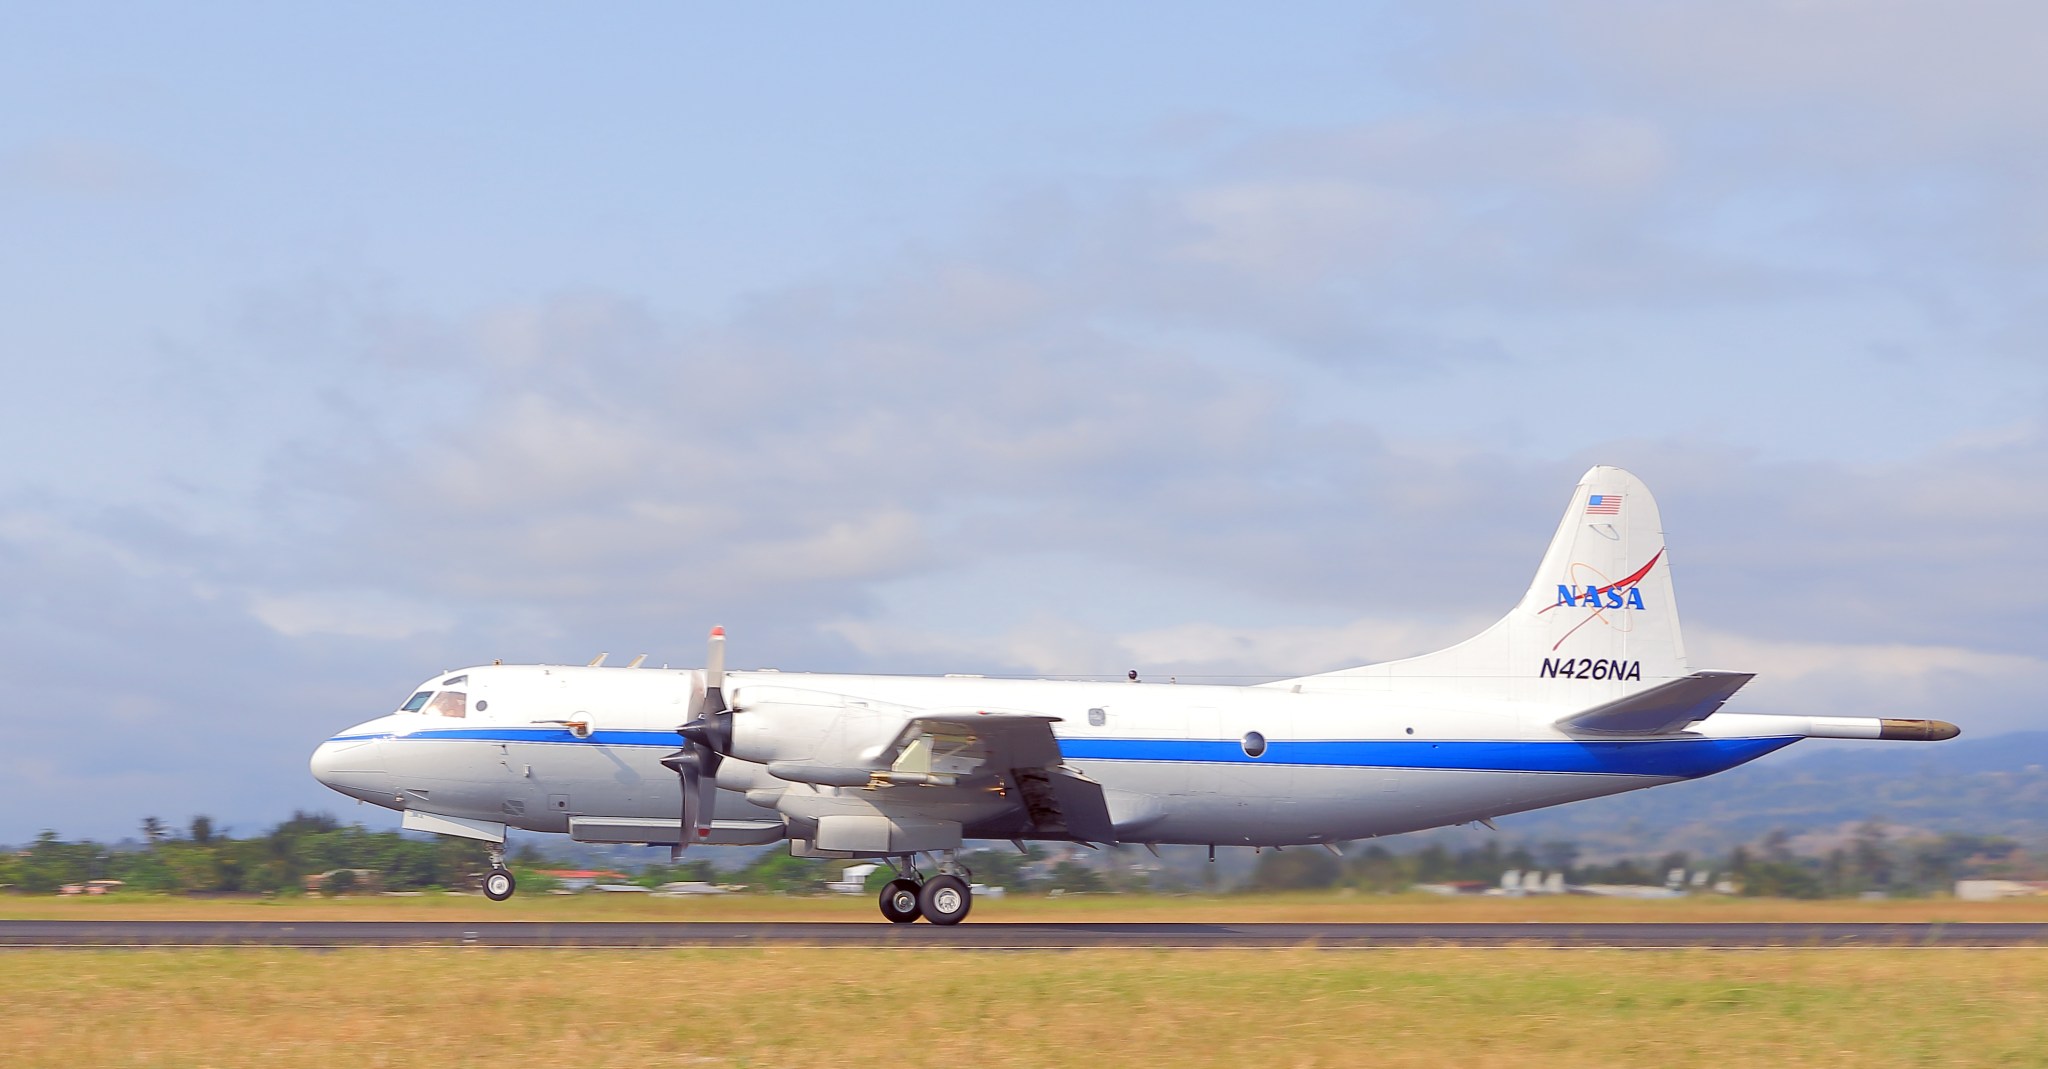 A large propeller plane takes off from a runway, surrounded by brown and green grasses with low buildings out of focus in the background. The plane is white with a blue stripe down the middle, and has a NASA logo on the tail. The sky is a hazy blue with some clouds.